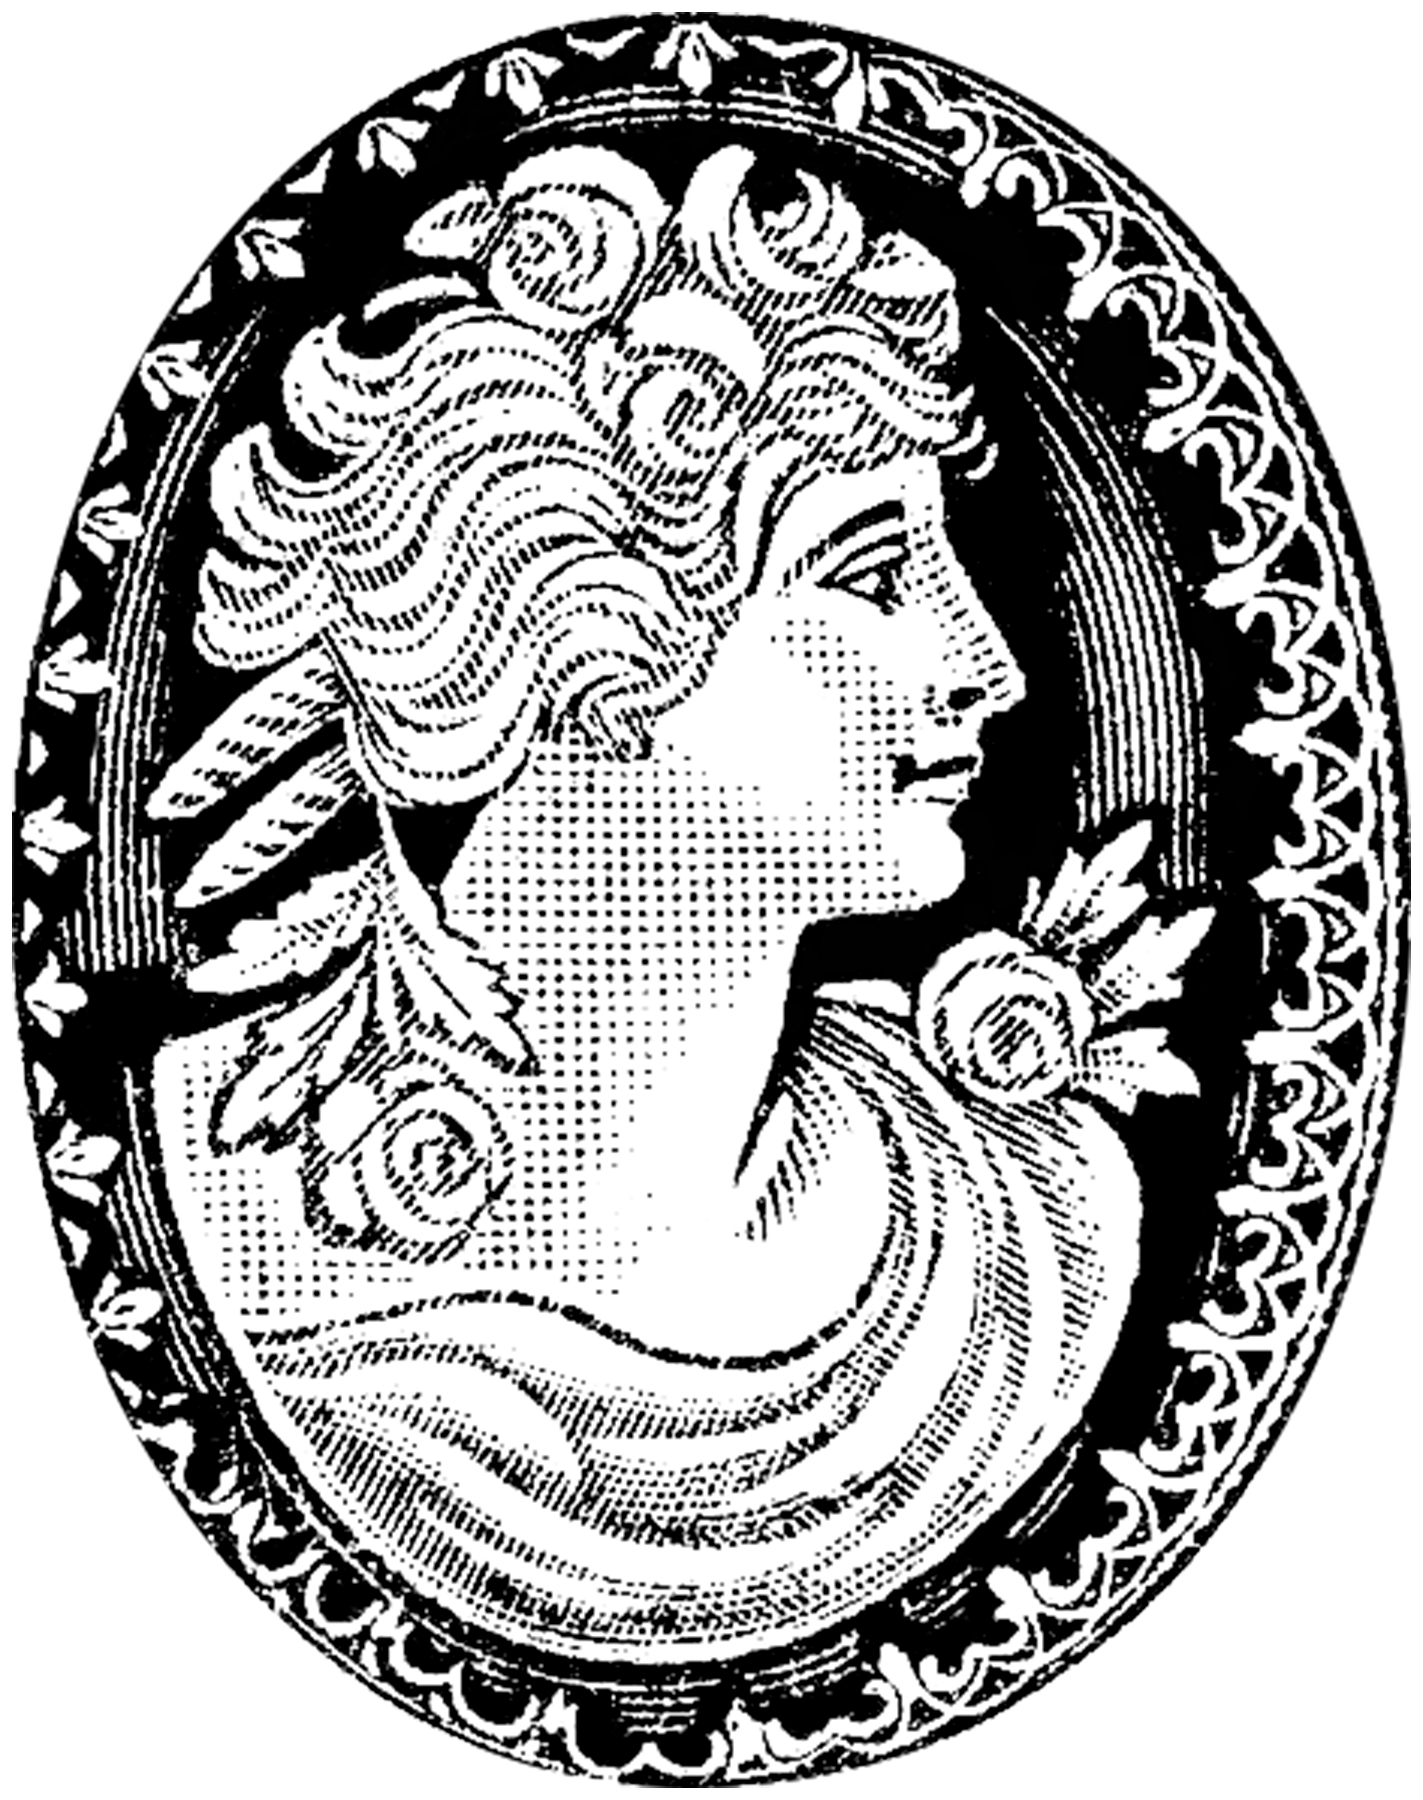 vintage cameo coloring pages